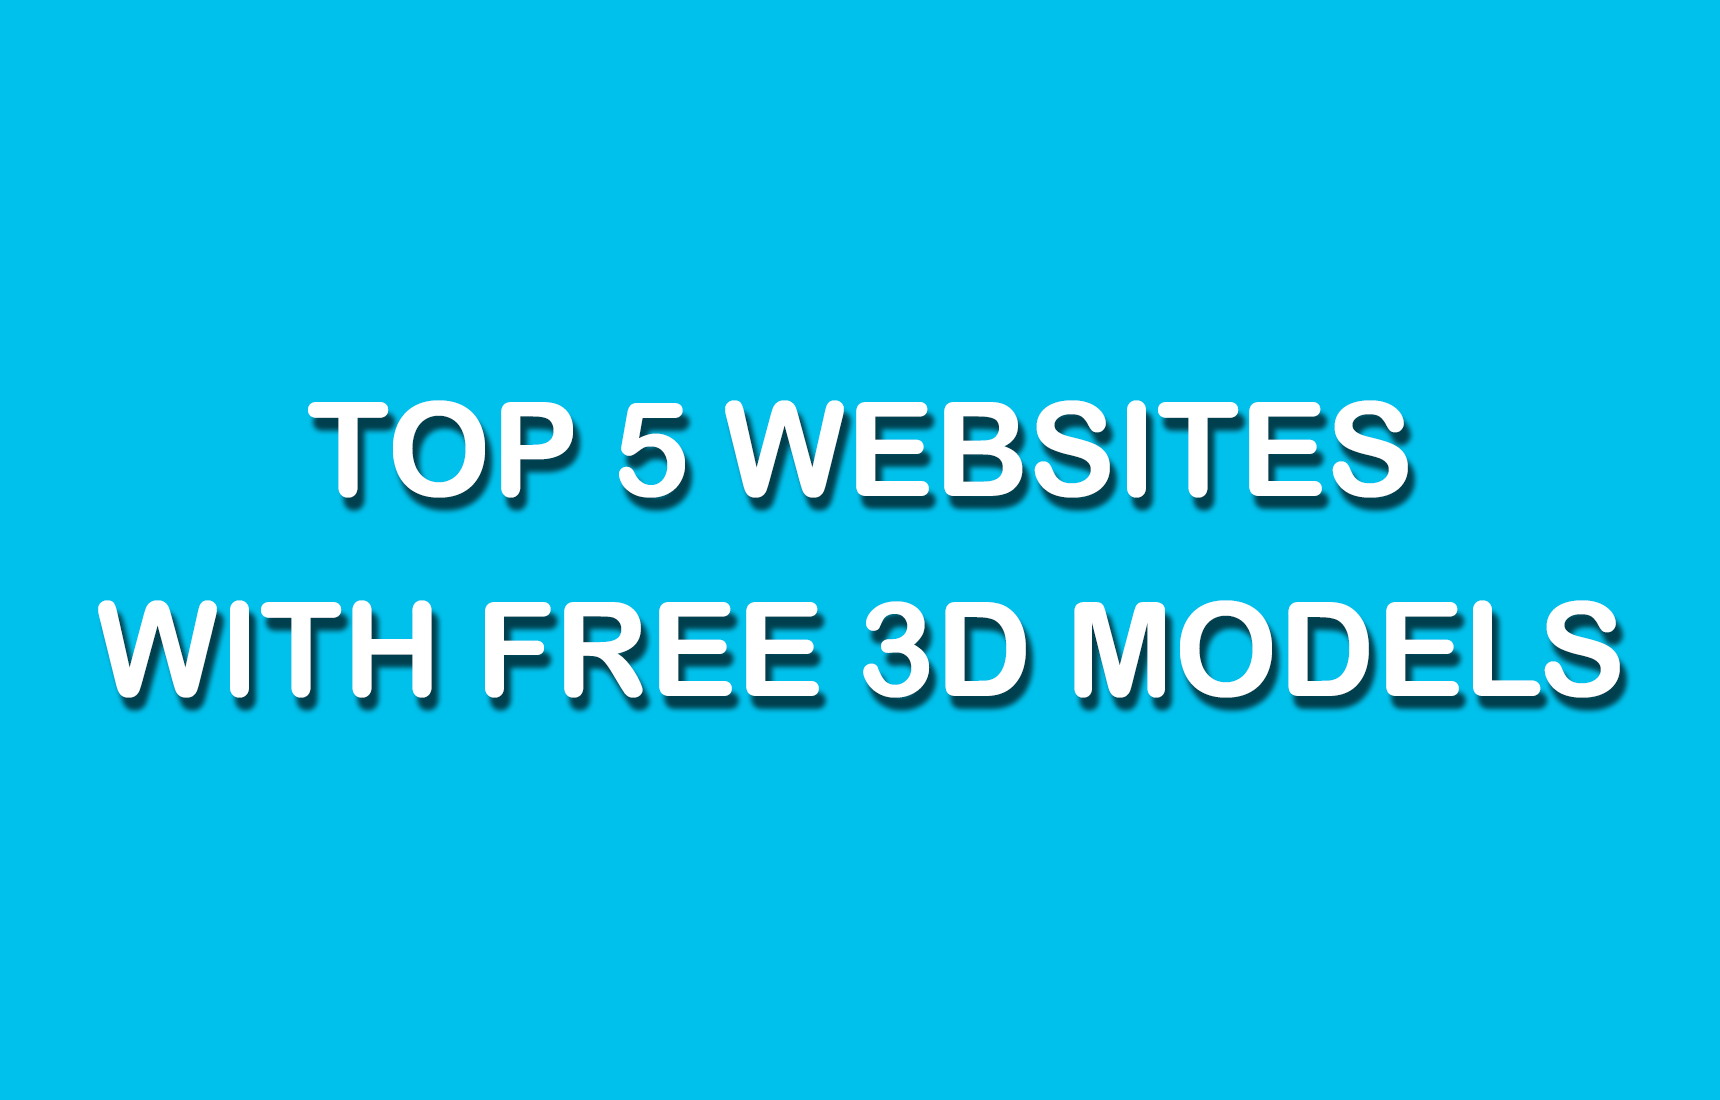 Top 5 Websites With Free 3D Printable Models? - Free 3D Printable Models